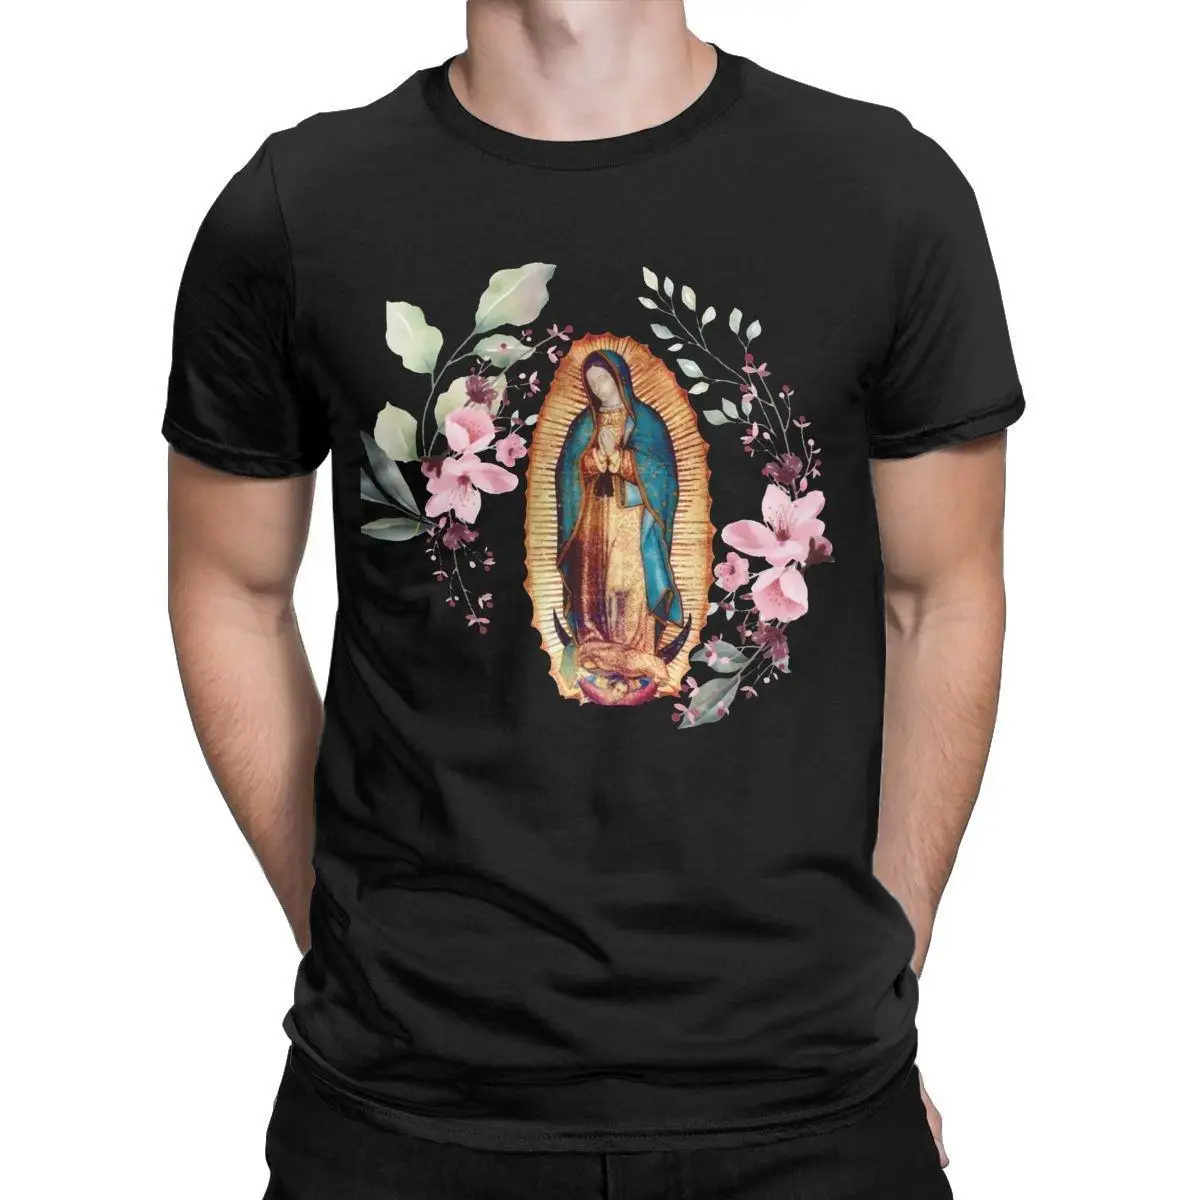 Our Lady Of Guadalupe Nuestra De Guadalupe T Shirt Men 100% Cotton T-Shirts O Neck Virgin Mary Tee Shirt Short Sleeve Clothing